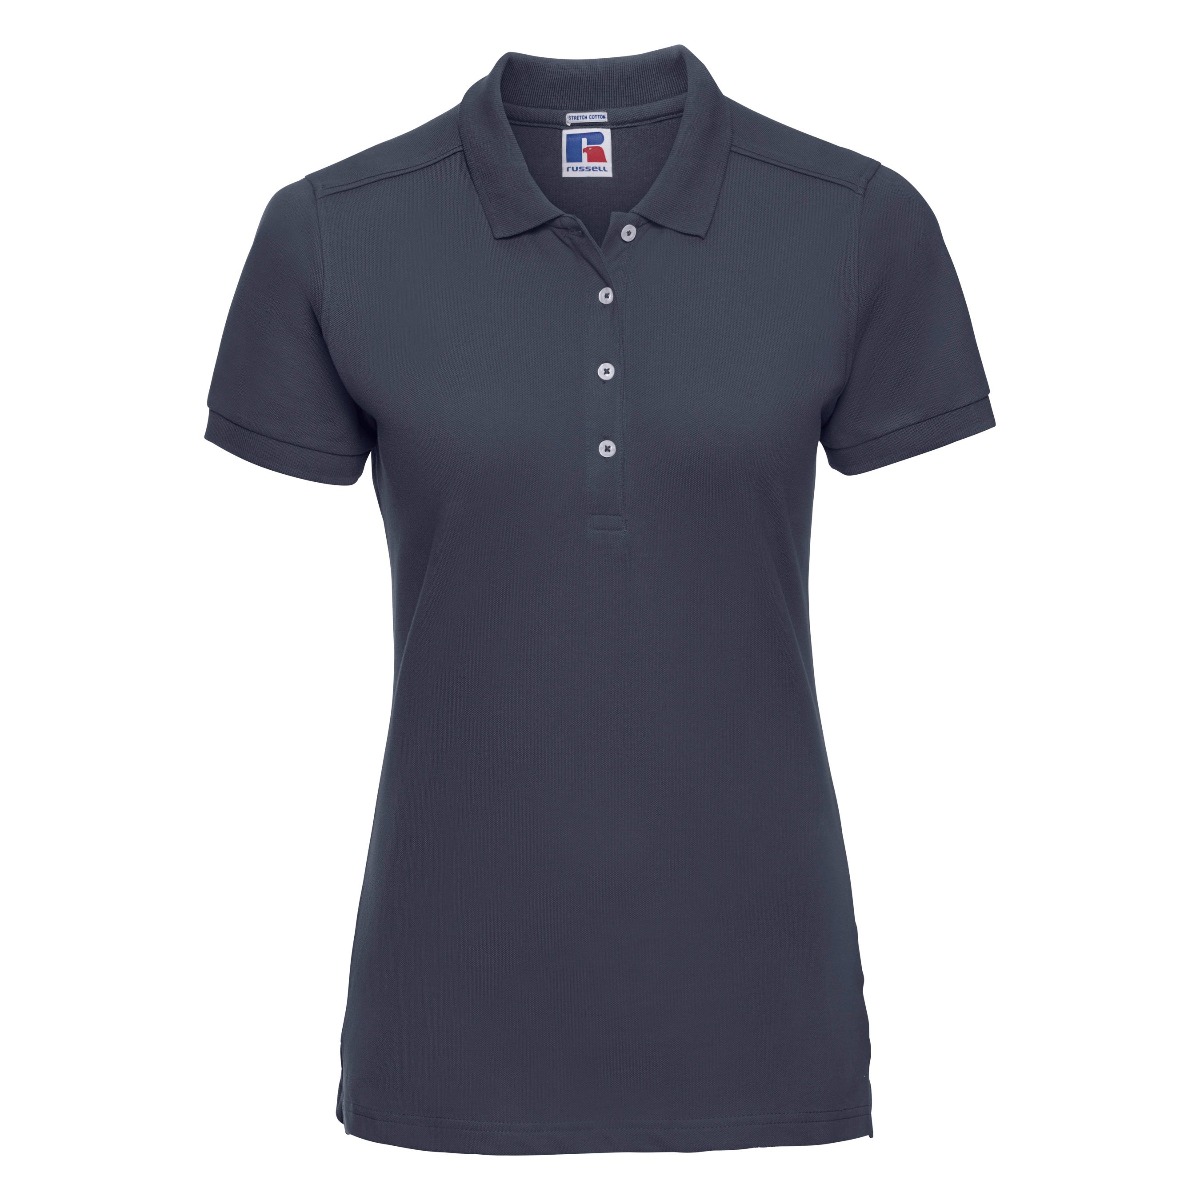 ax-httpswebsystems.s3.amazonaws.comtmp_for_downloadrussell-womens-stretch-french-navy_2.jpg